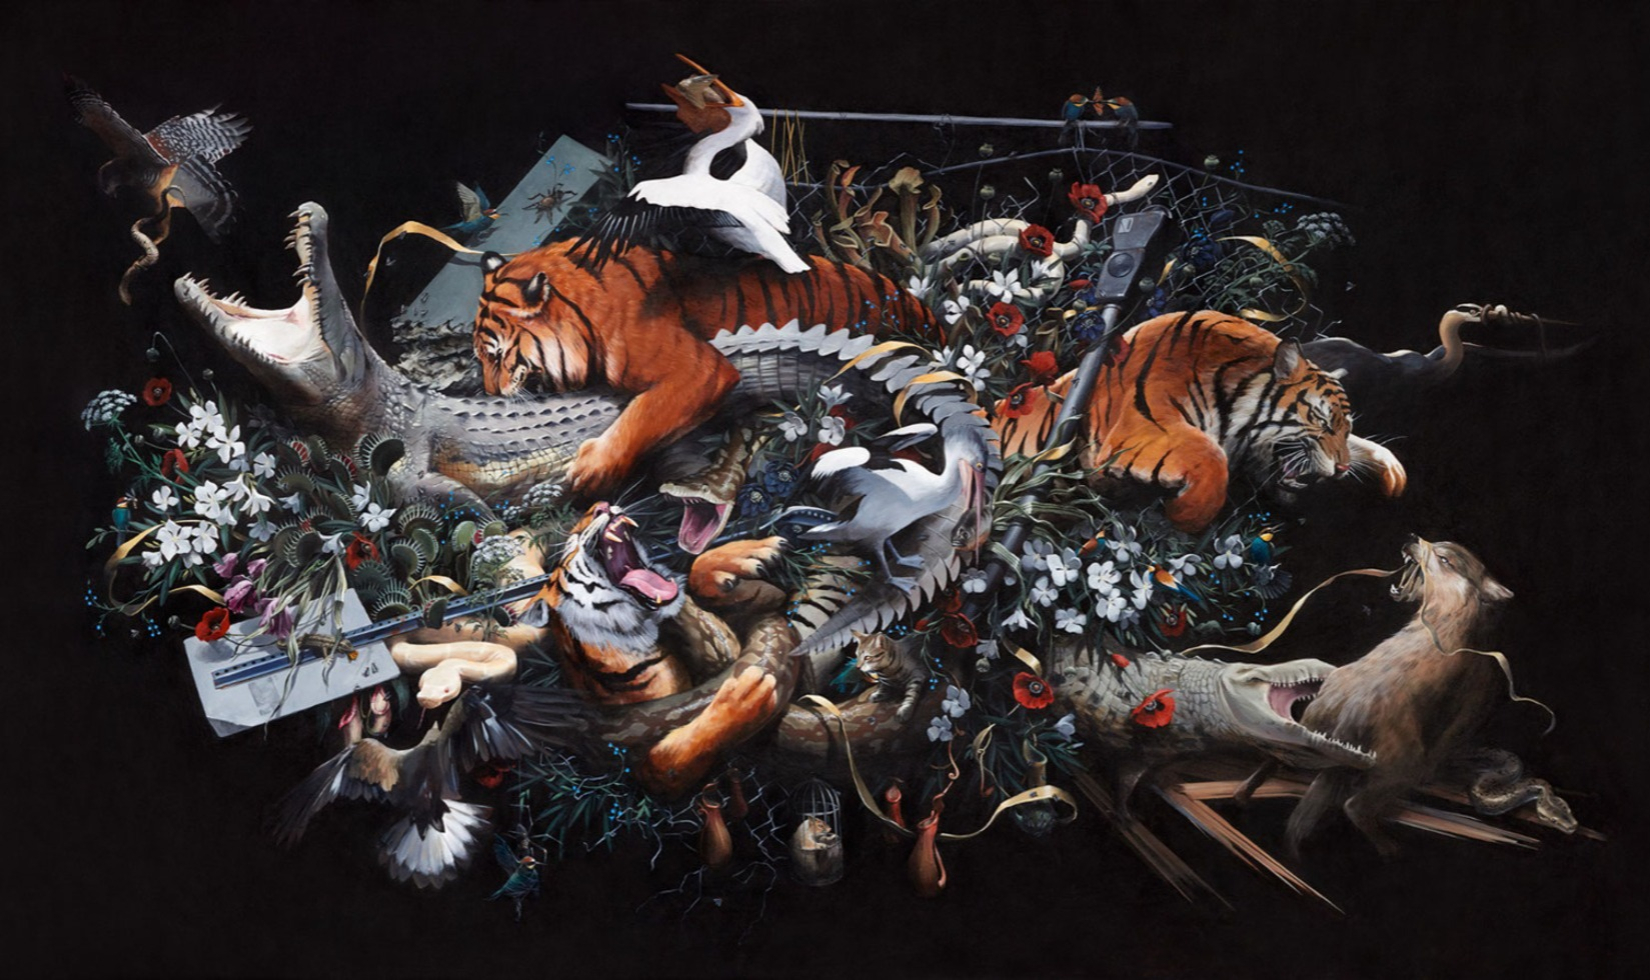 Print of artwork showing tigers, alligator, foxes and birds emerging from a mass of flowers.